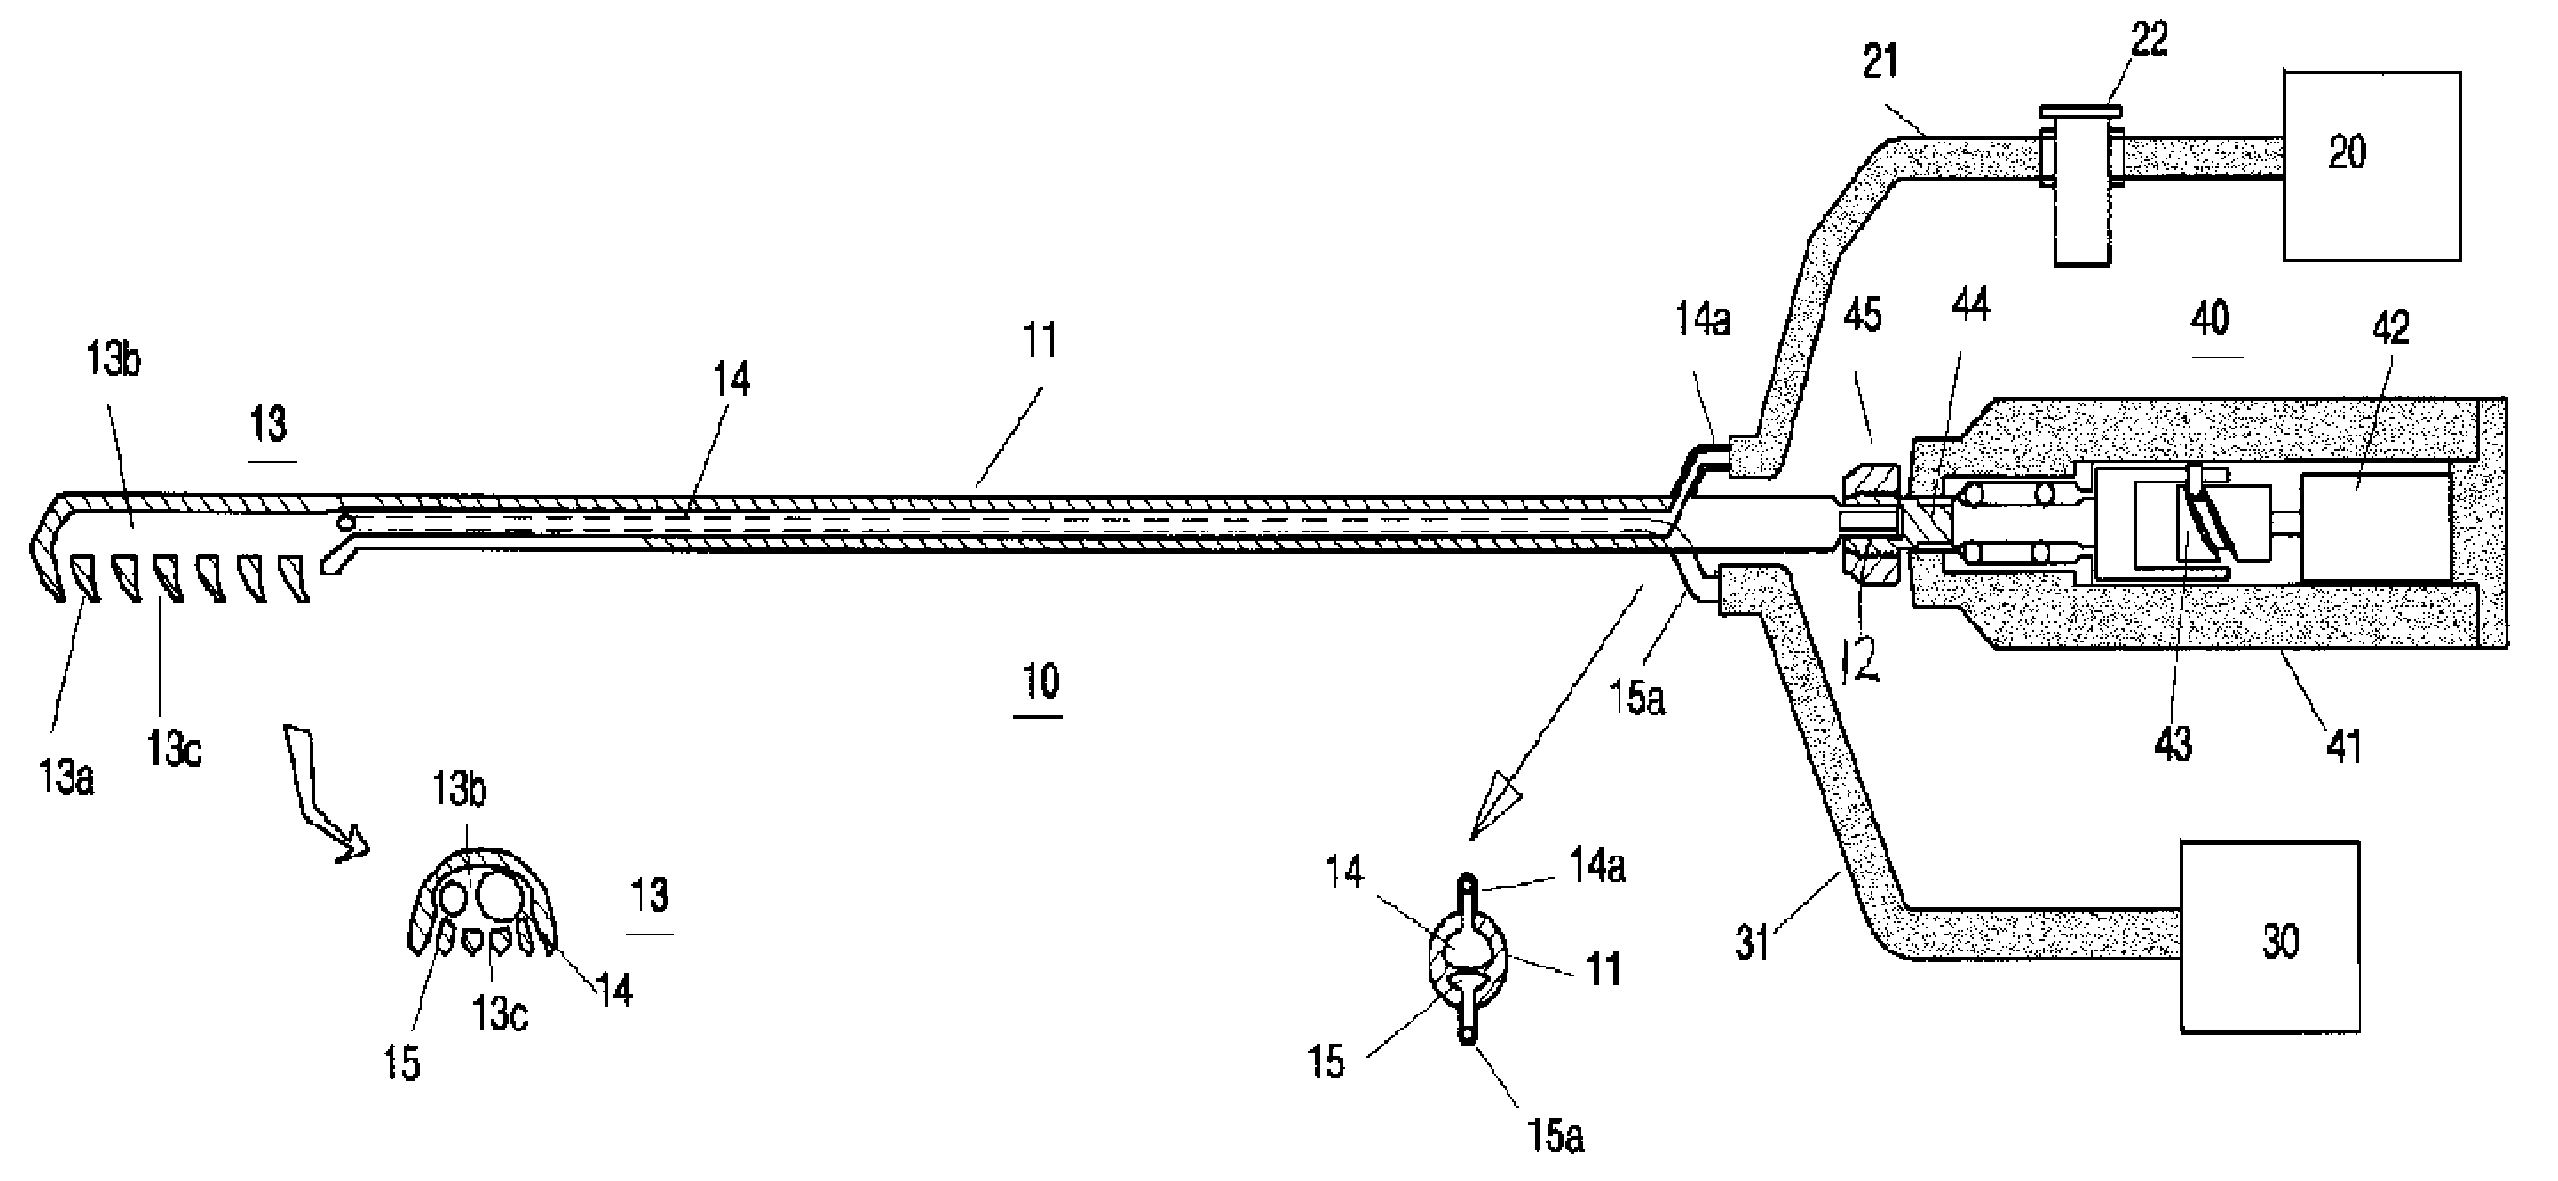 Facial bone contouring device using hollowed rasp provided with non-plugging holes formed through cutting plane